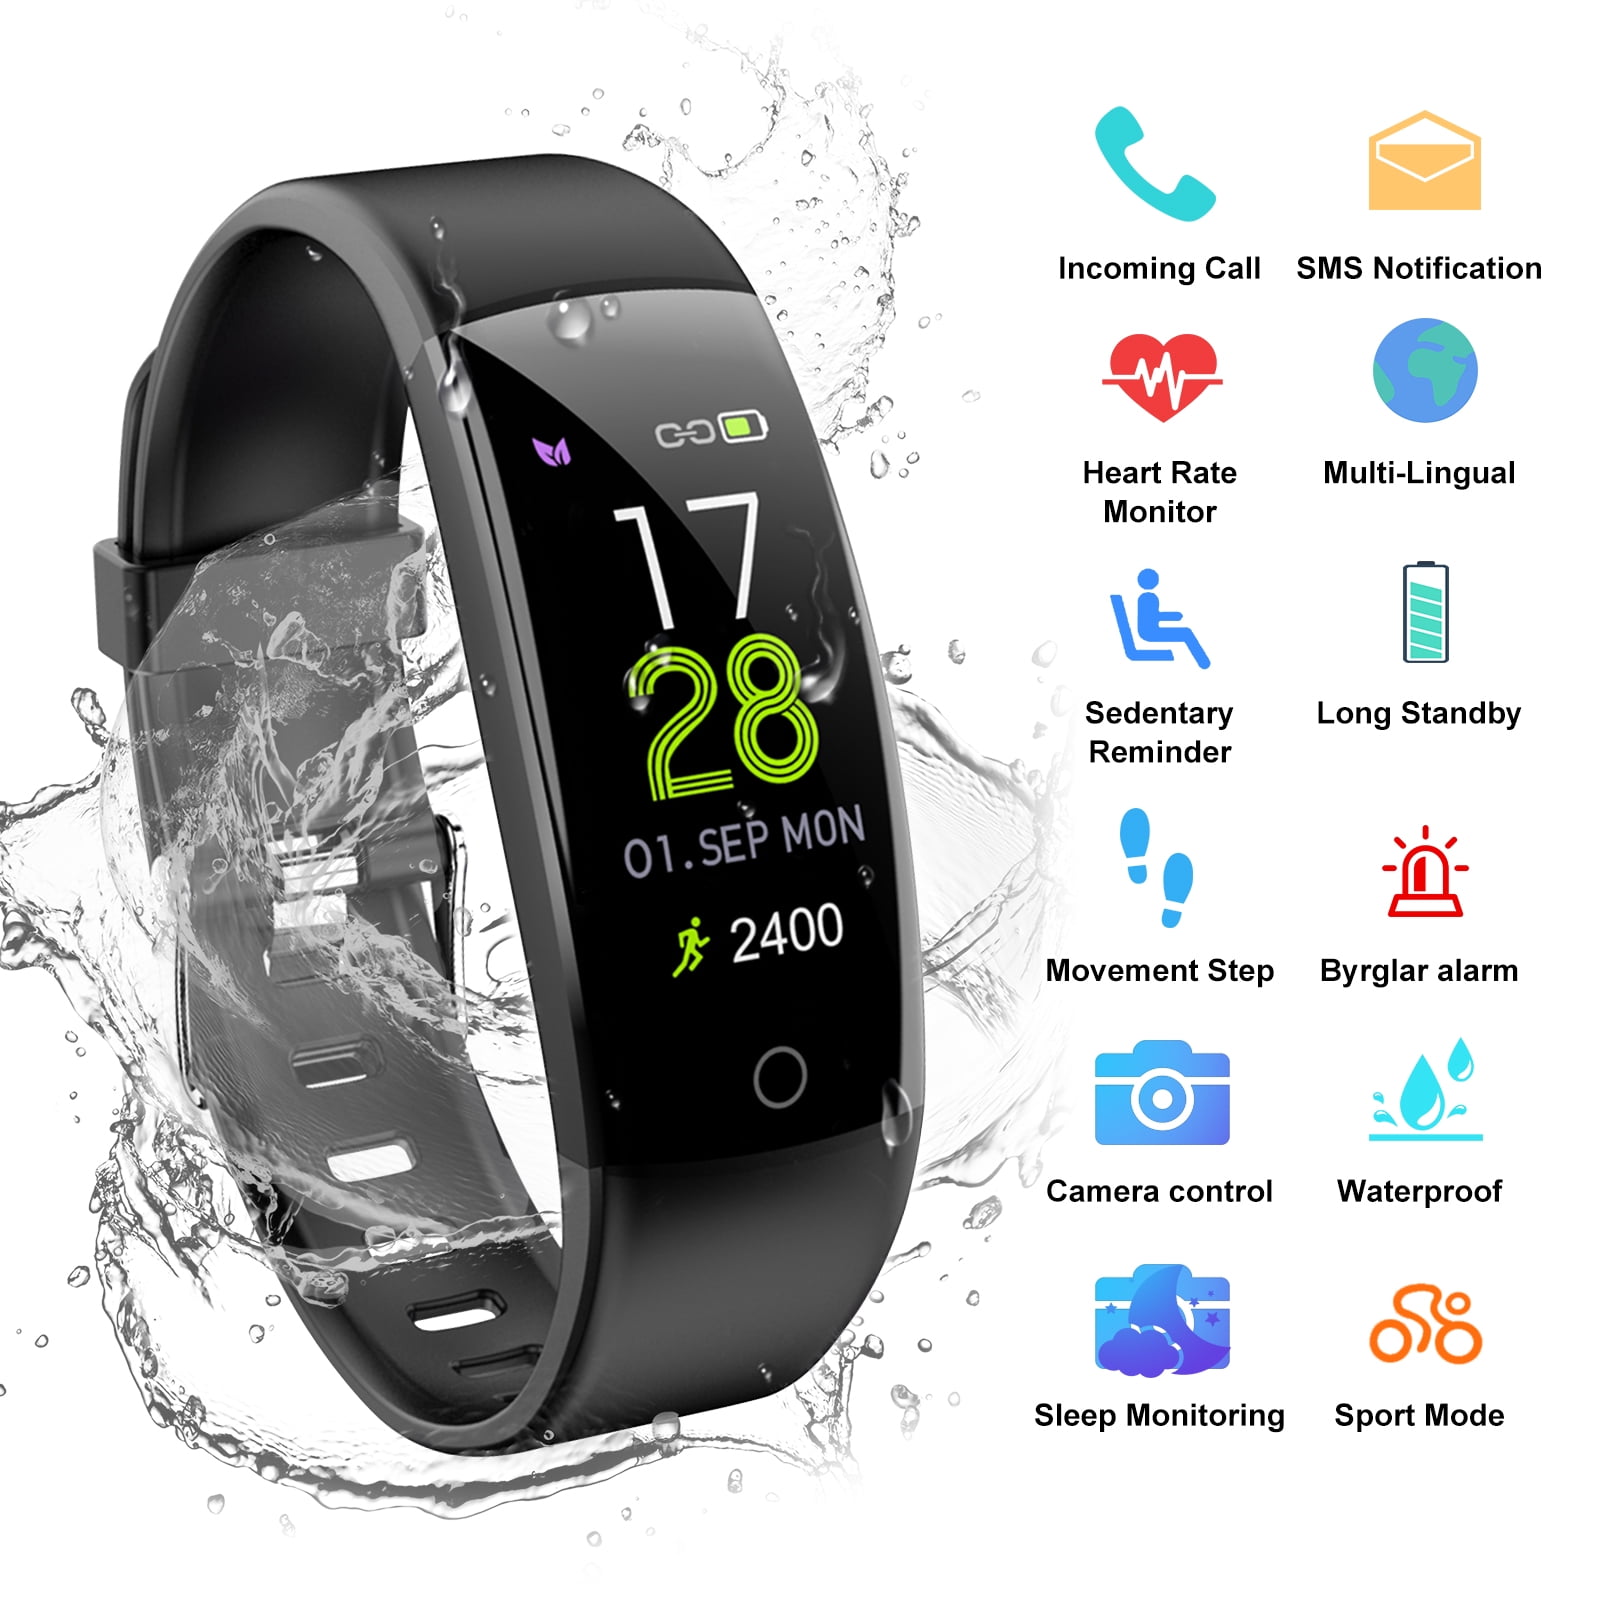 Hot selling cheap $4 D13 smartwatch| Alibaba.com